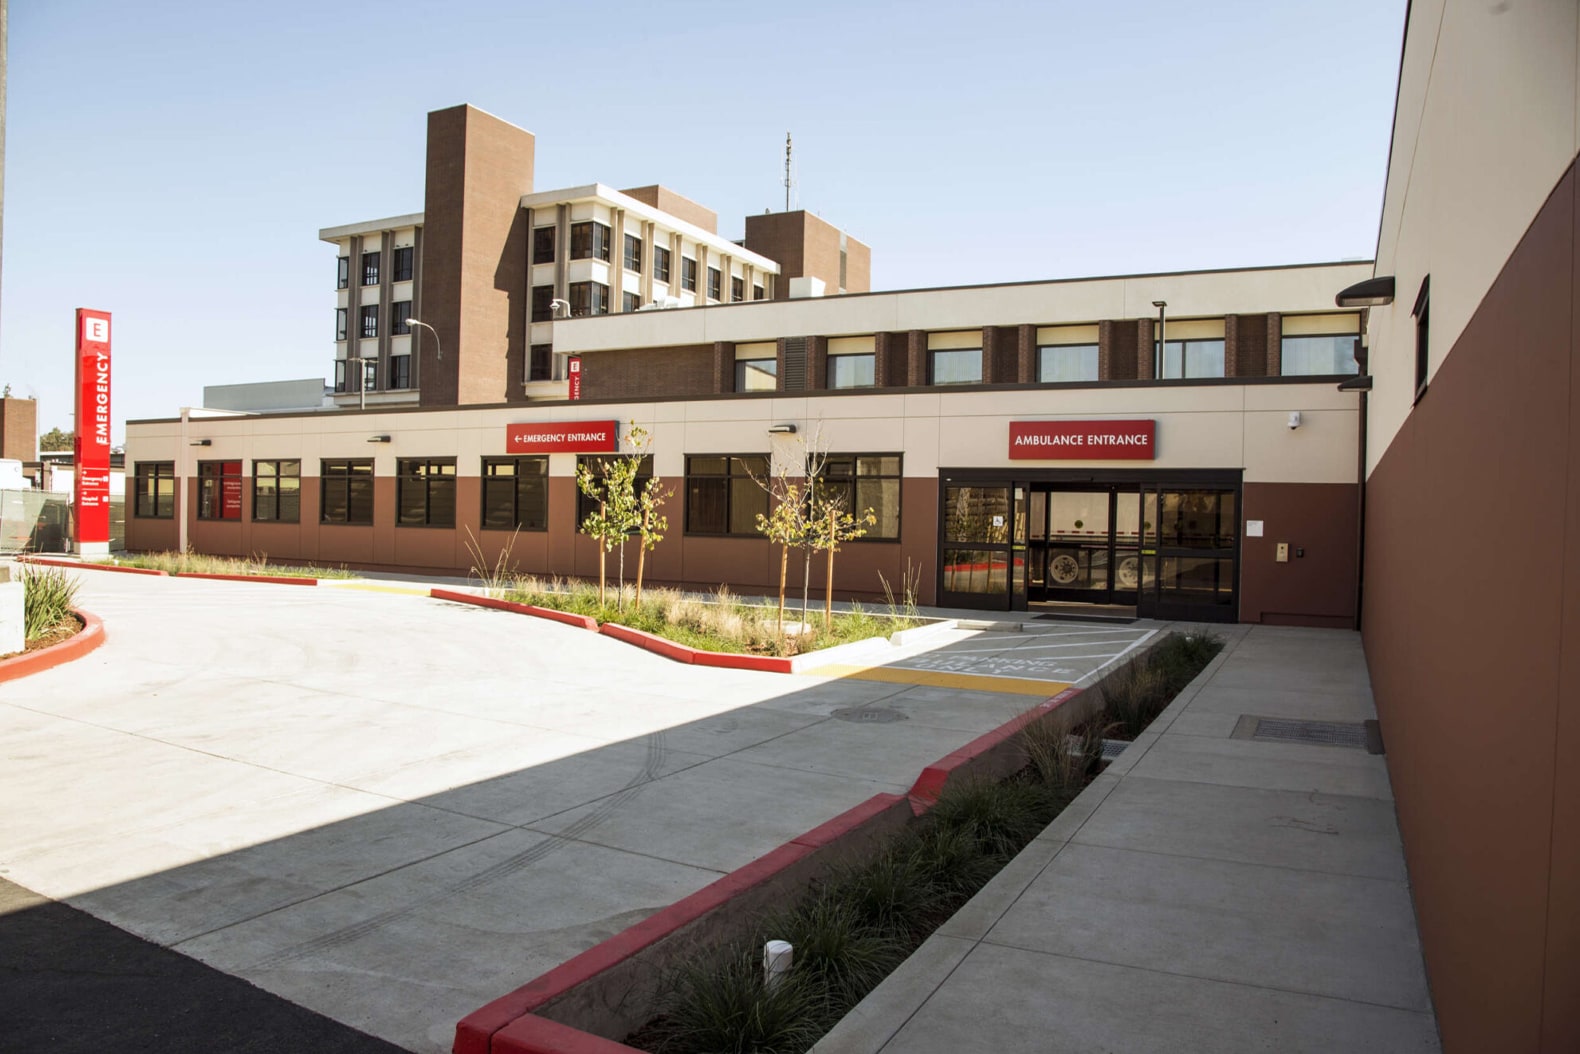 Daytime outdoor view with ambulance entrance of the Kaiser Permanente Emergency Department Expansion at the Sacramento Medical Center